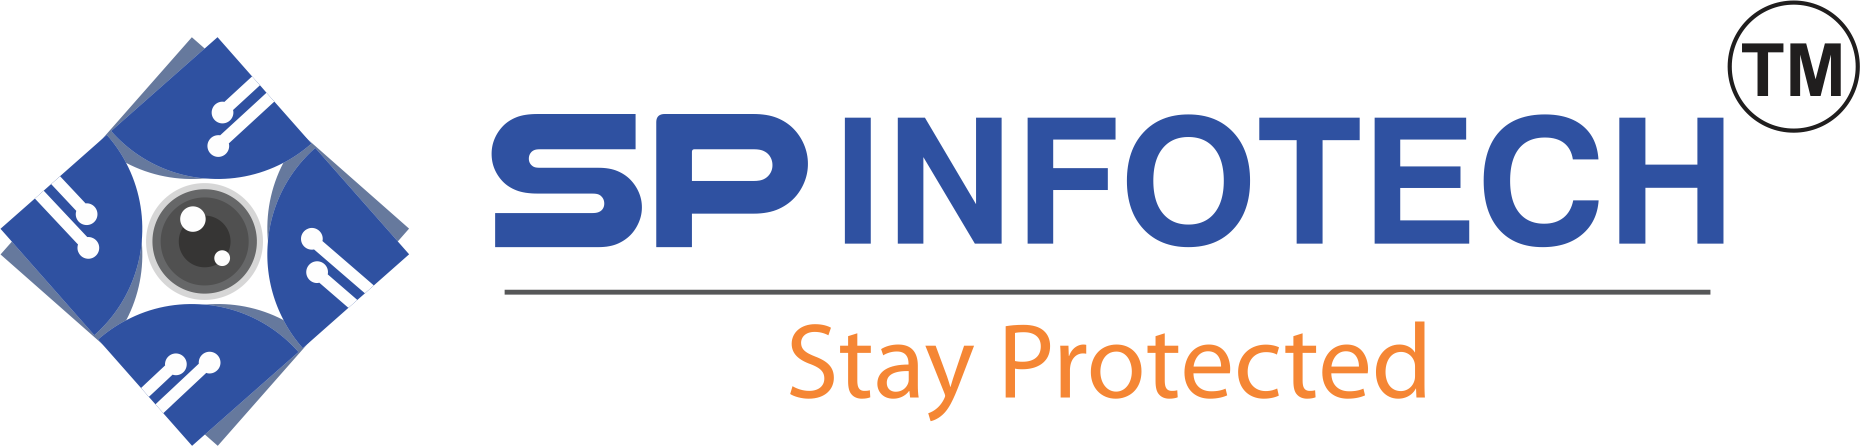 SP infotech - Your Global IT Source